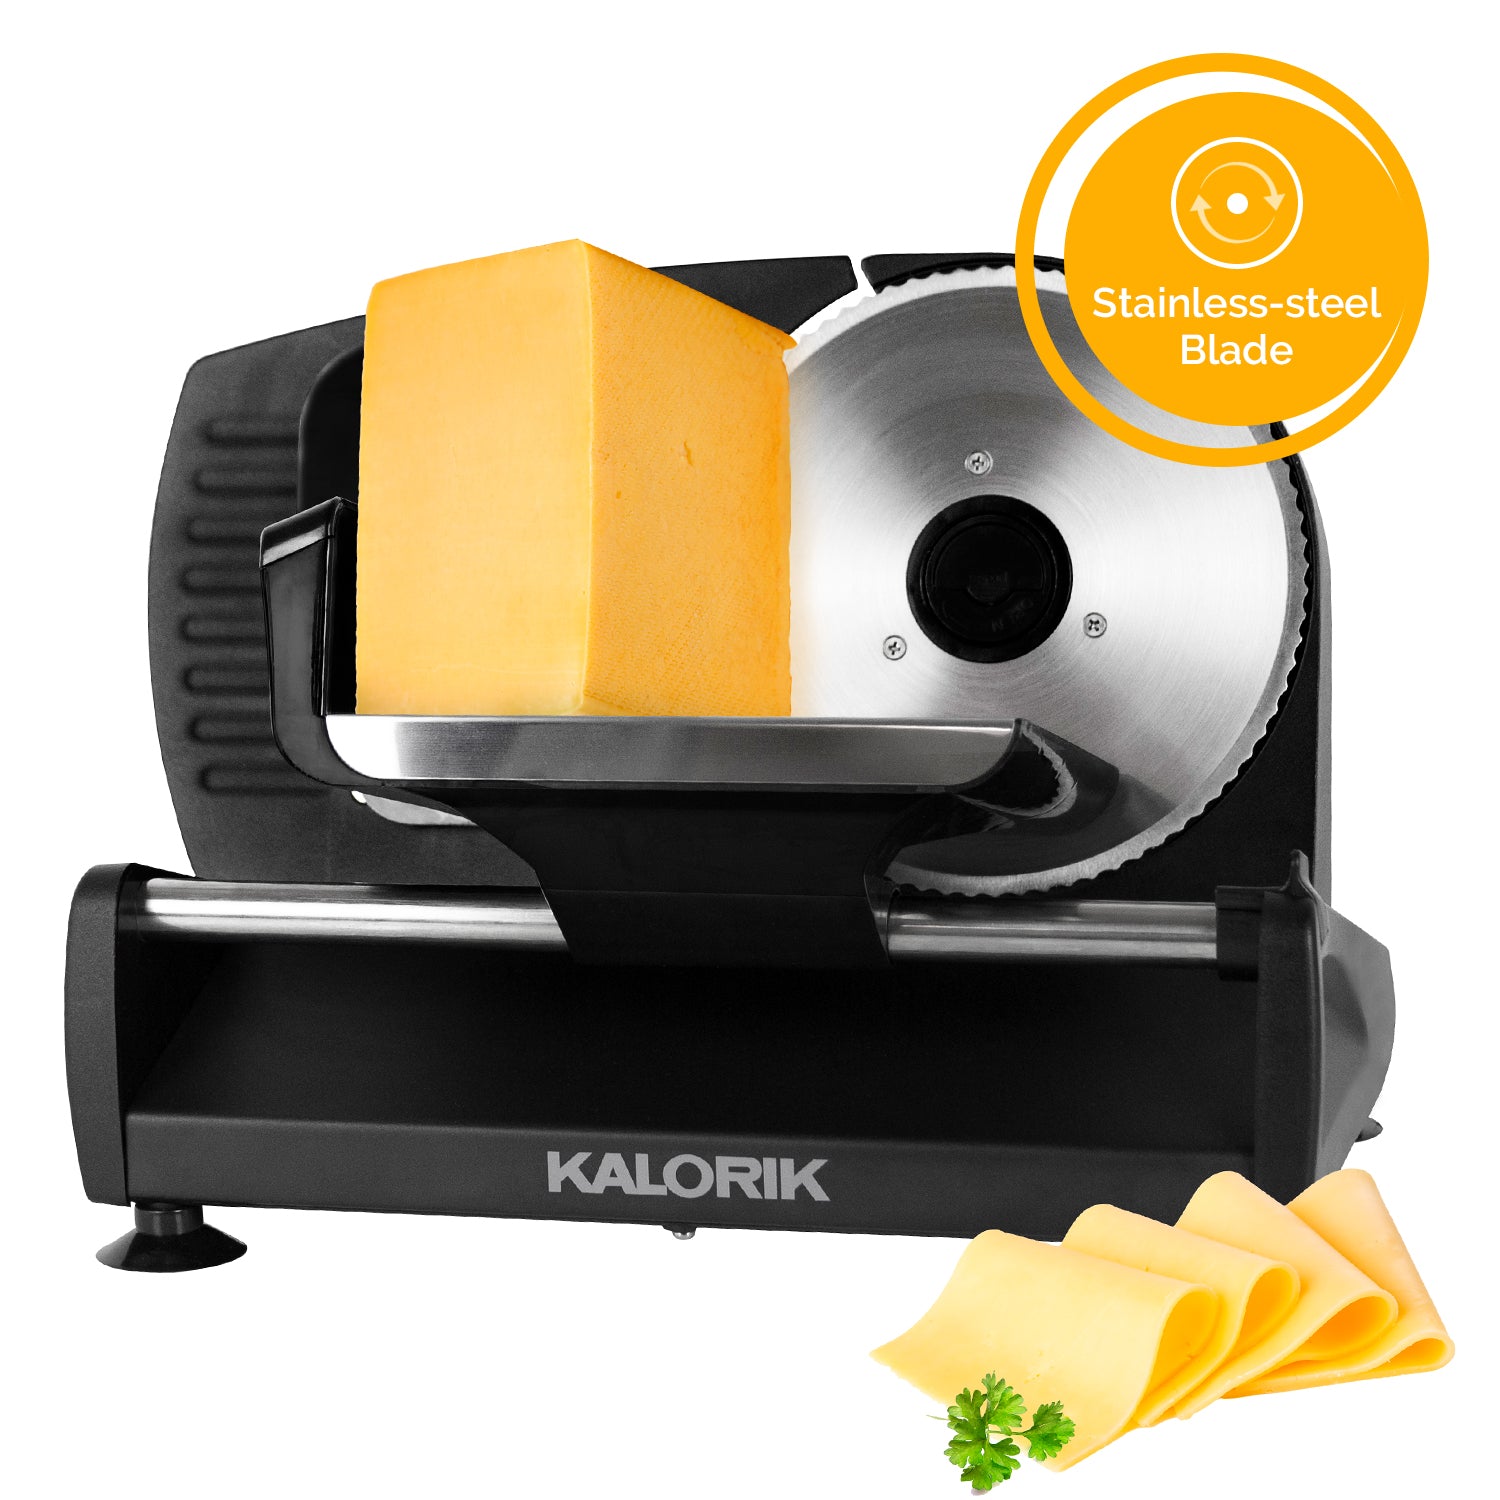  Kalorik 200W Professional Food Slicer with Safety Switch, Easy  to Clean, Stainless Steel: Home & Kitchen